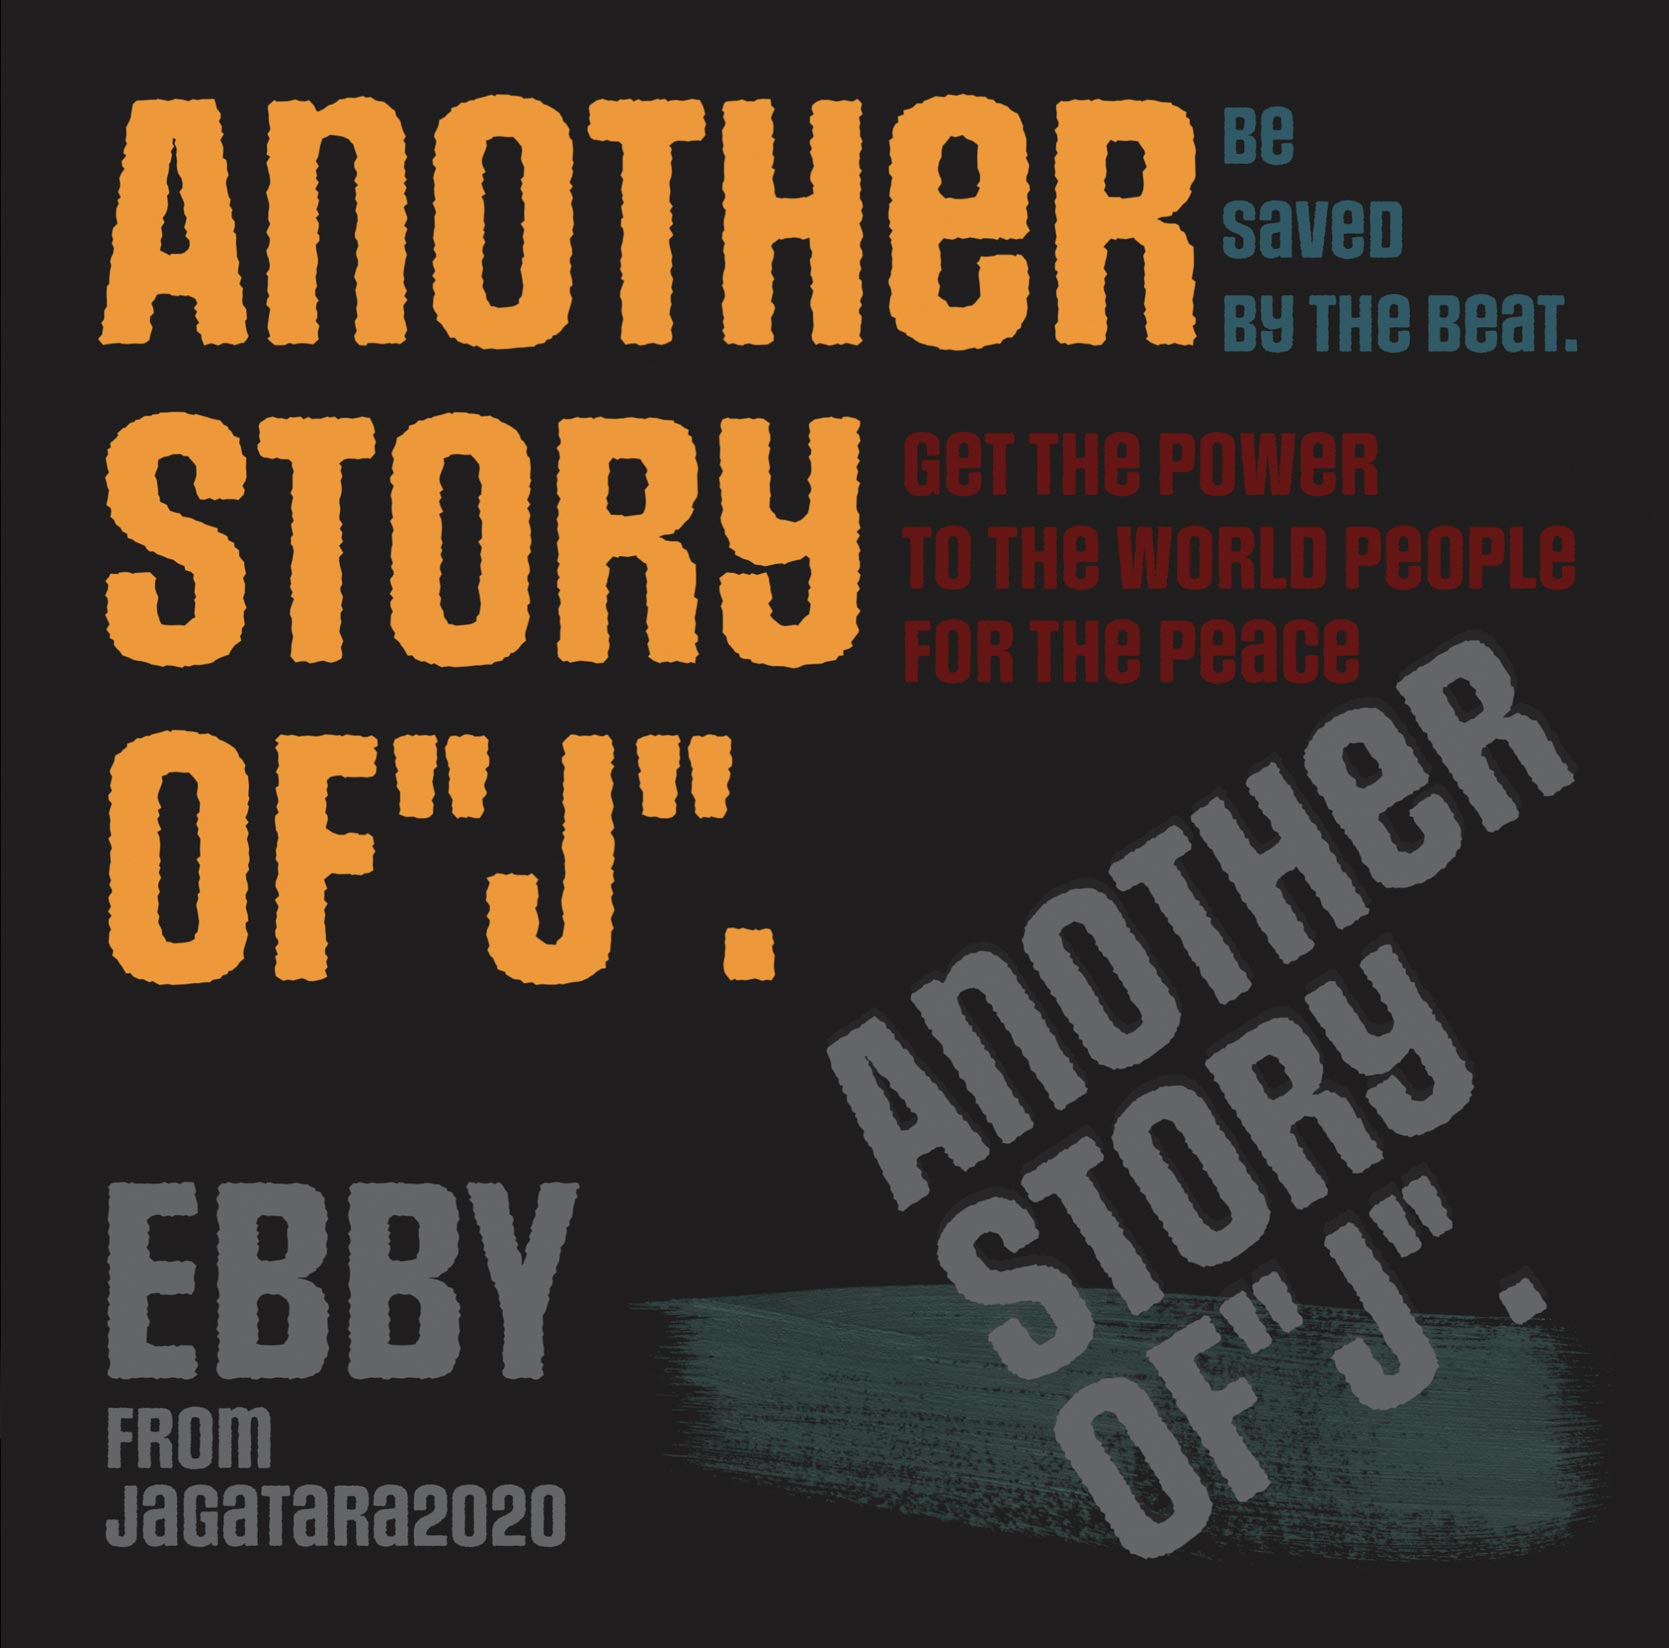 EBBY FROM JAGATARA2020「ANOTHER STORY OF“J”」